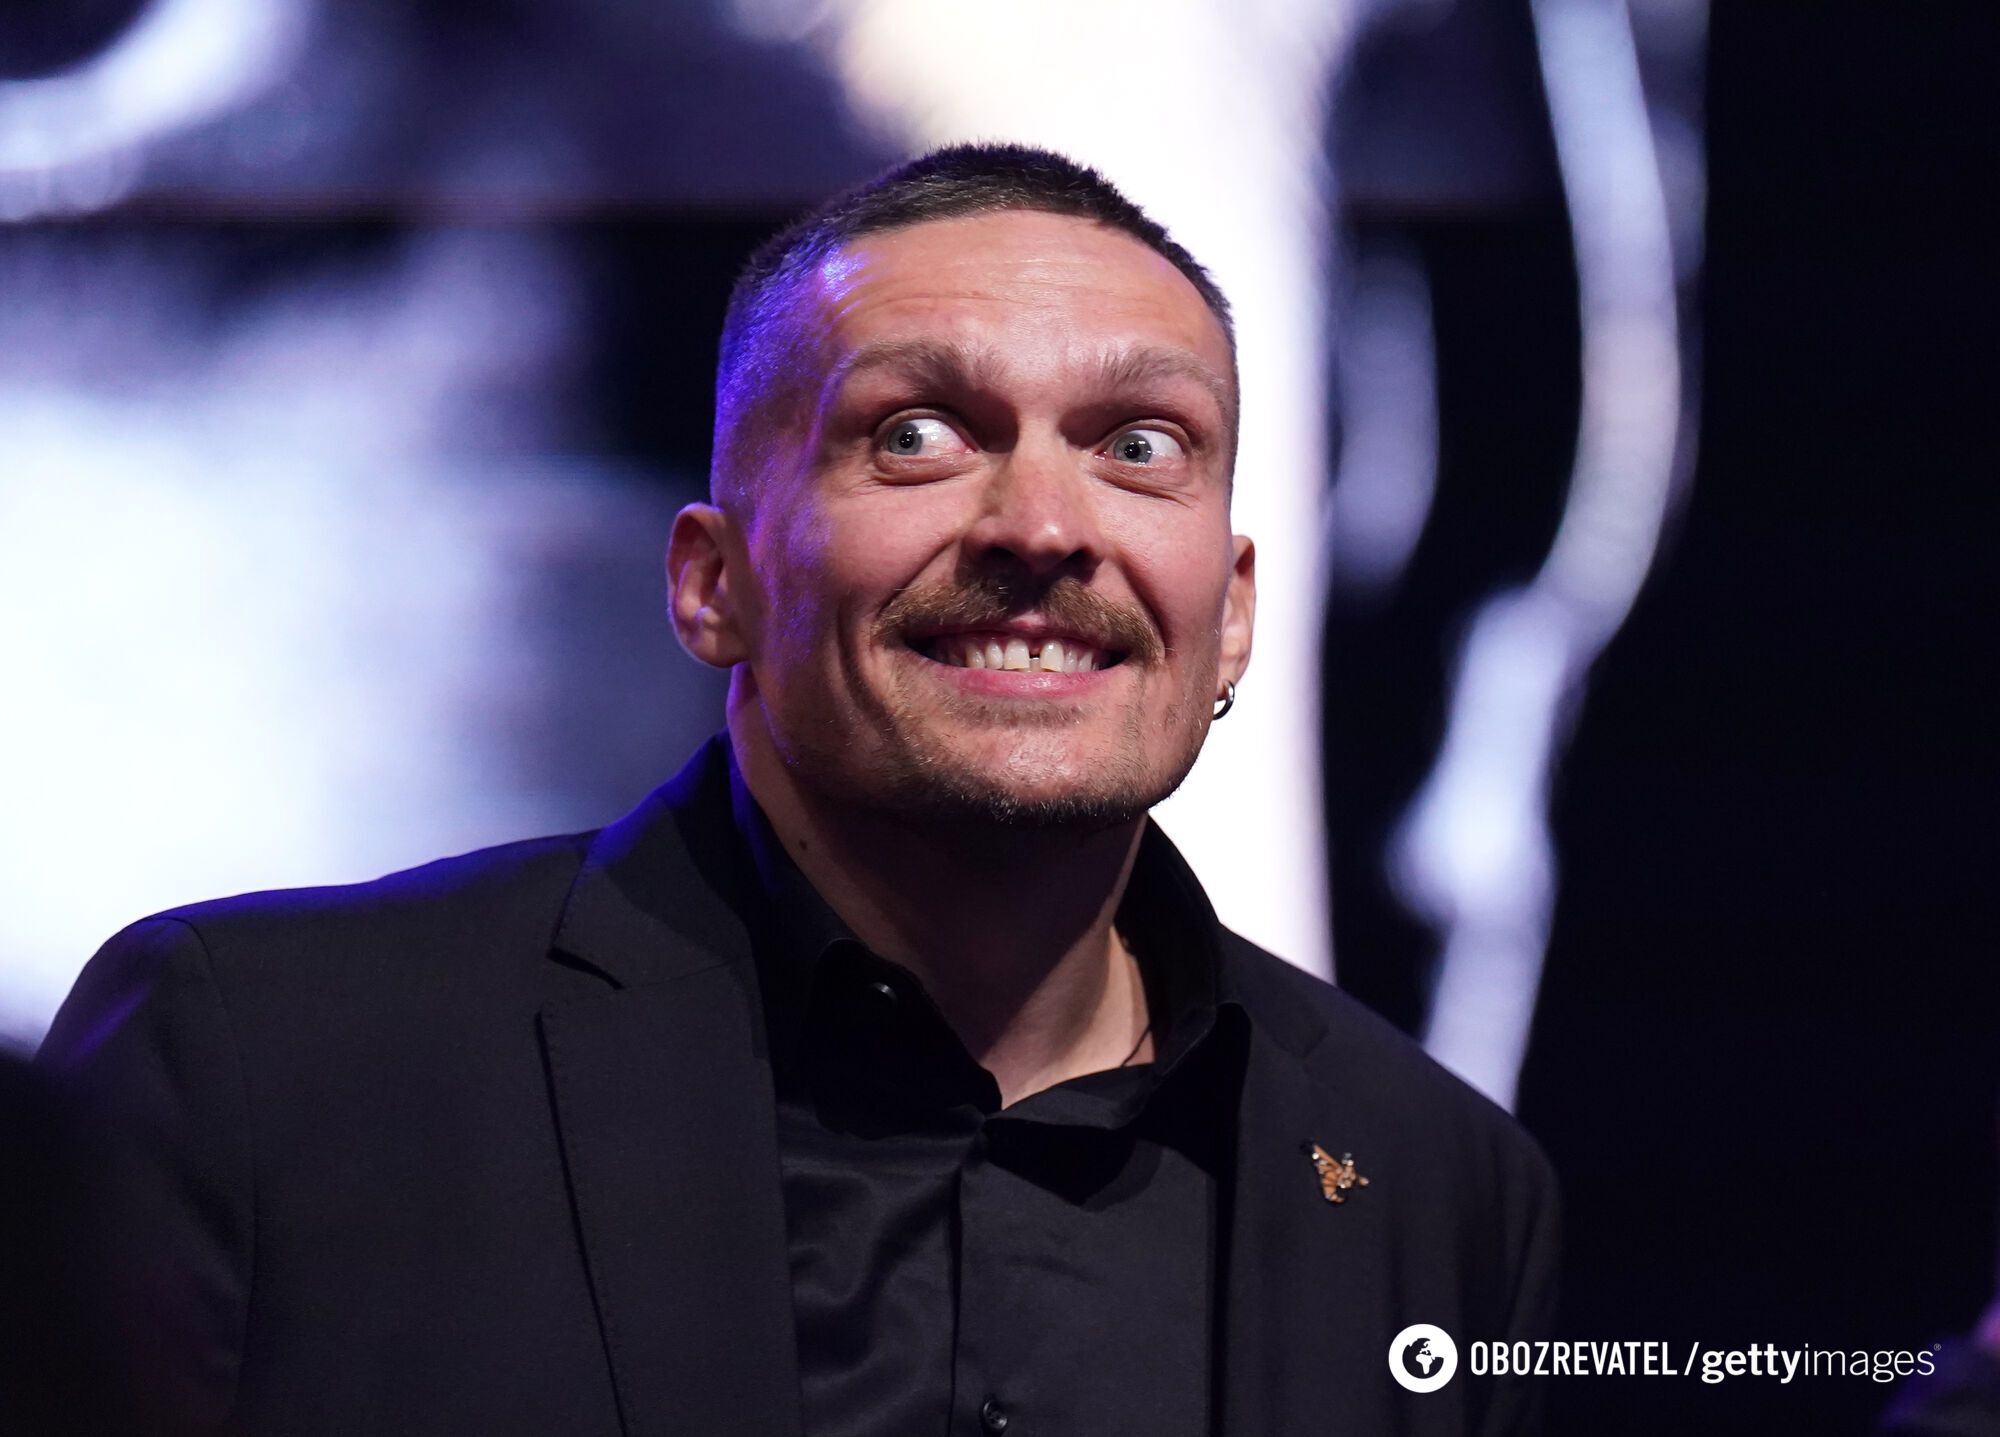 ''Can't be guaranteed'': WBO makes statement on Usyk-Fury rematch